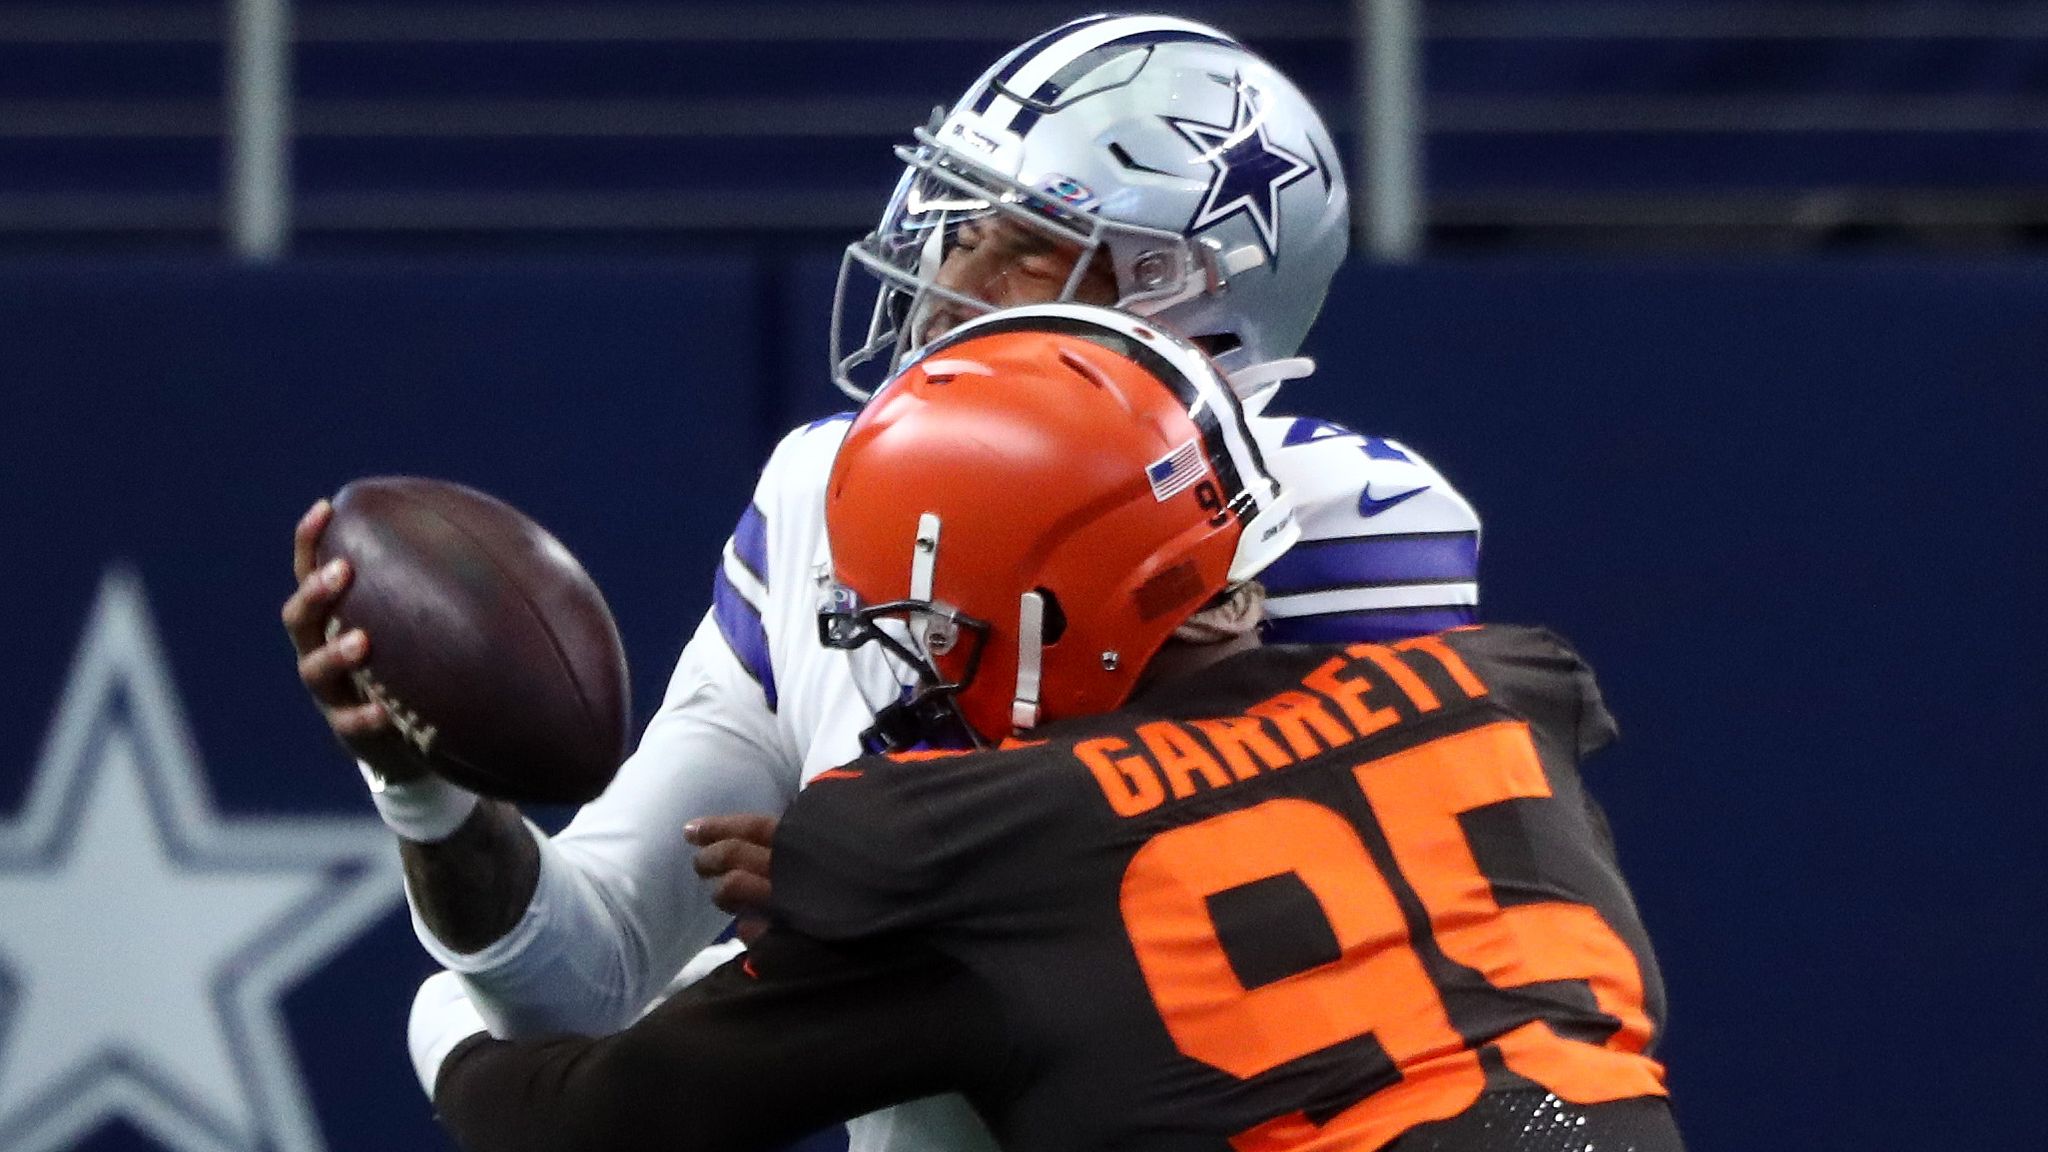 Browns vs. Patriots Final Score: Early turnovers kill Cleveland in